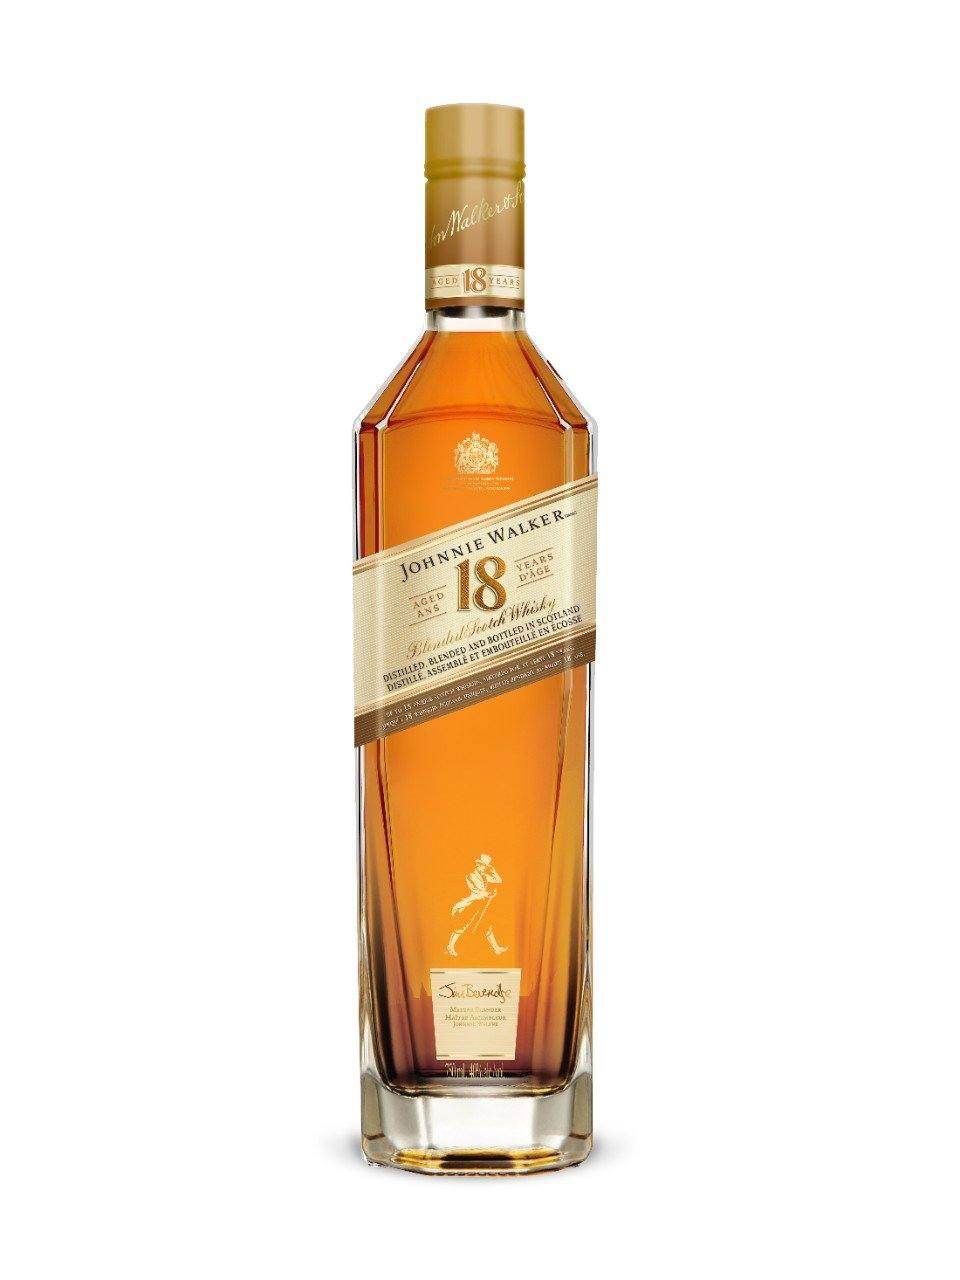 Johnnie Walker 18 Year Old Scotch Whisky | Exquisite Wine & Alcohol Gift Delivery Toronto Canada | Vyno